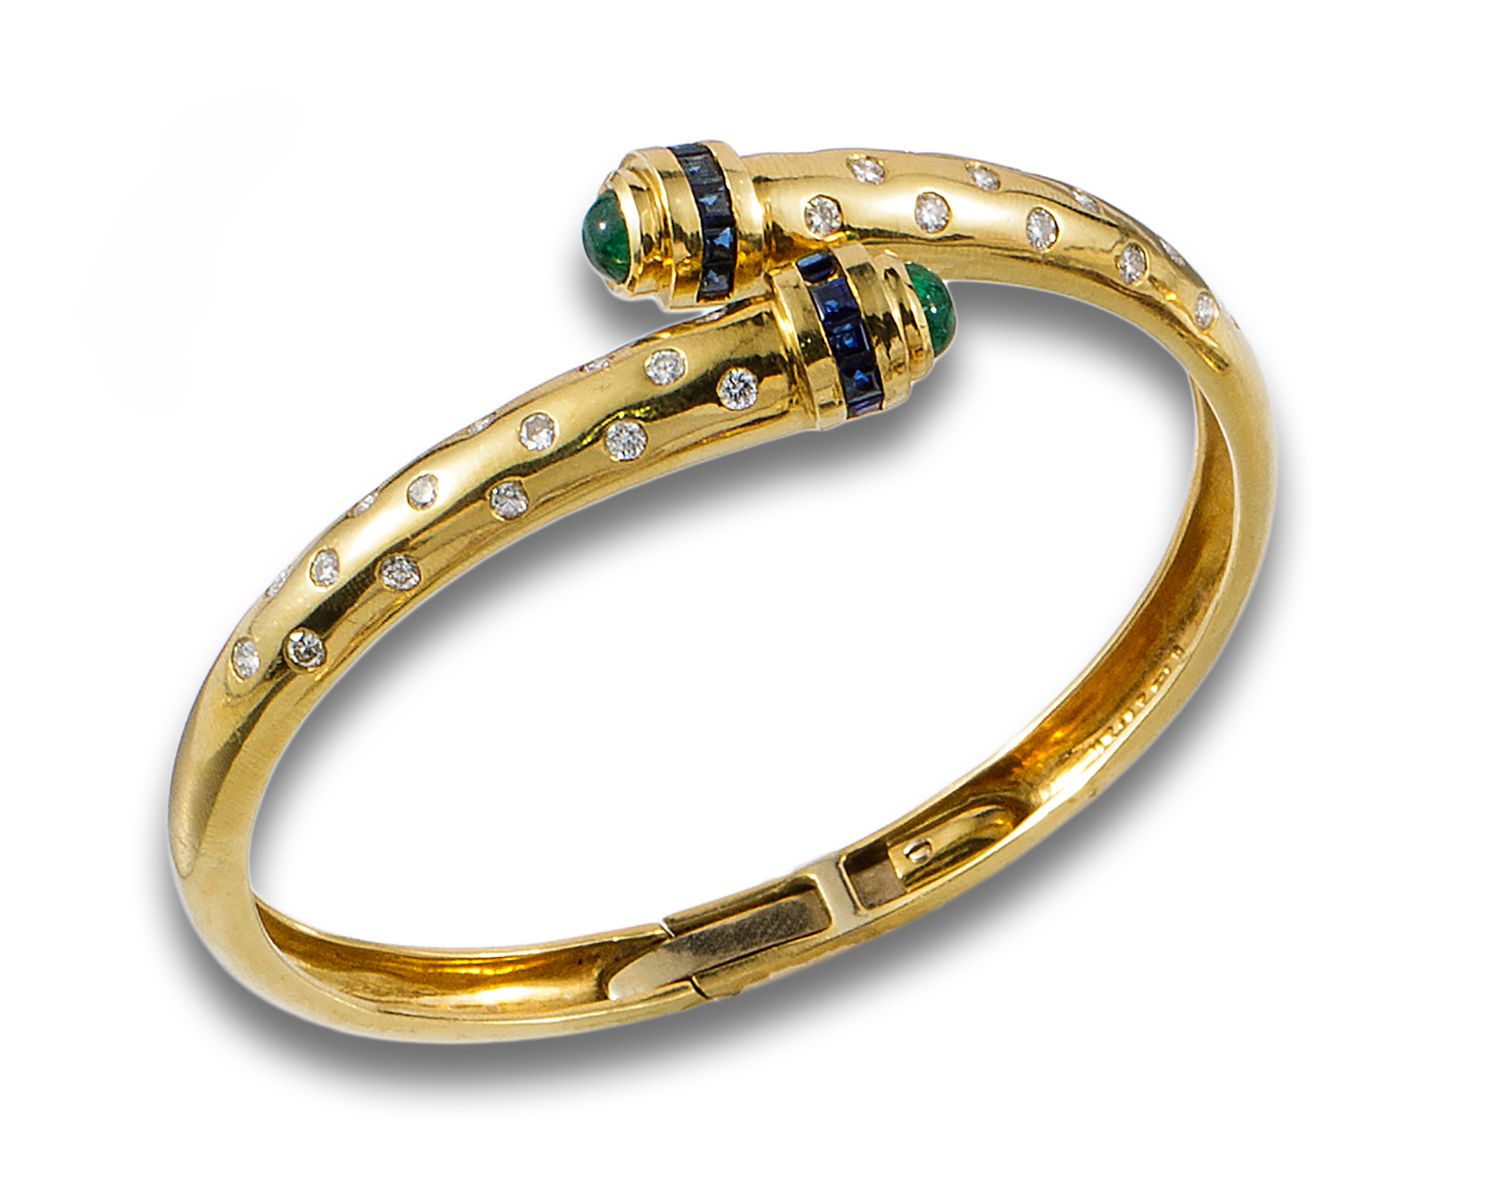 18 kt yellow gold torque bracelet. Made up of emerald cabochons at the ends, row&hellip;